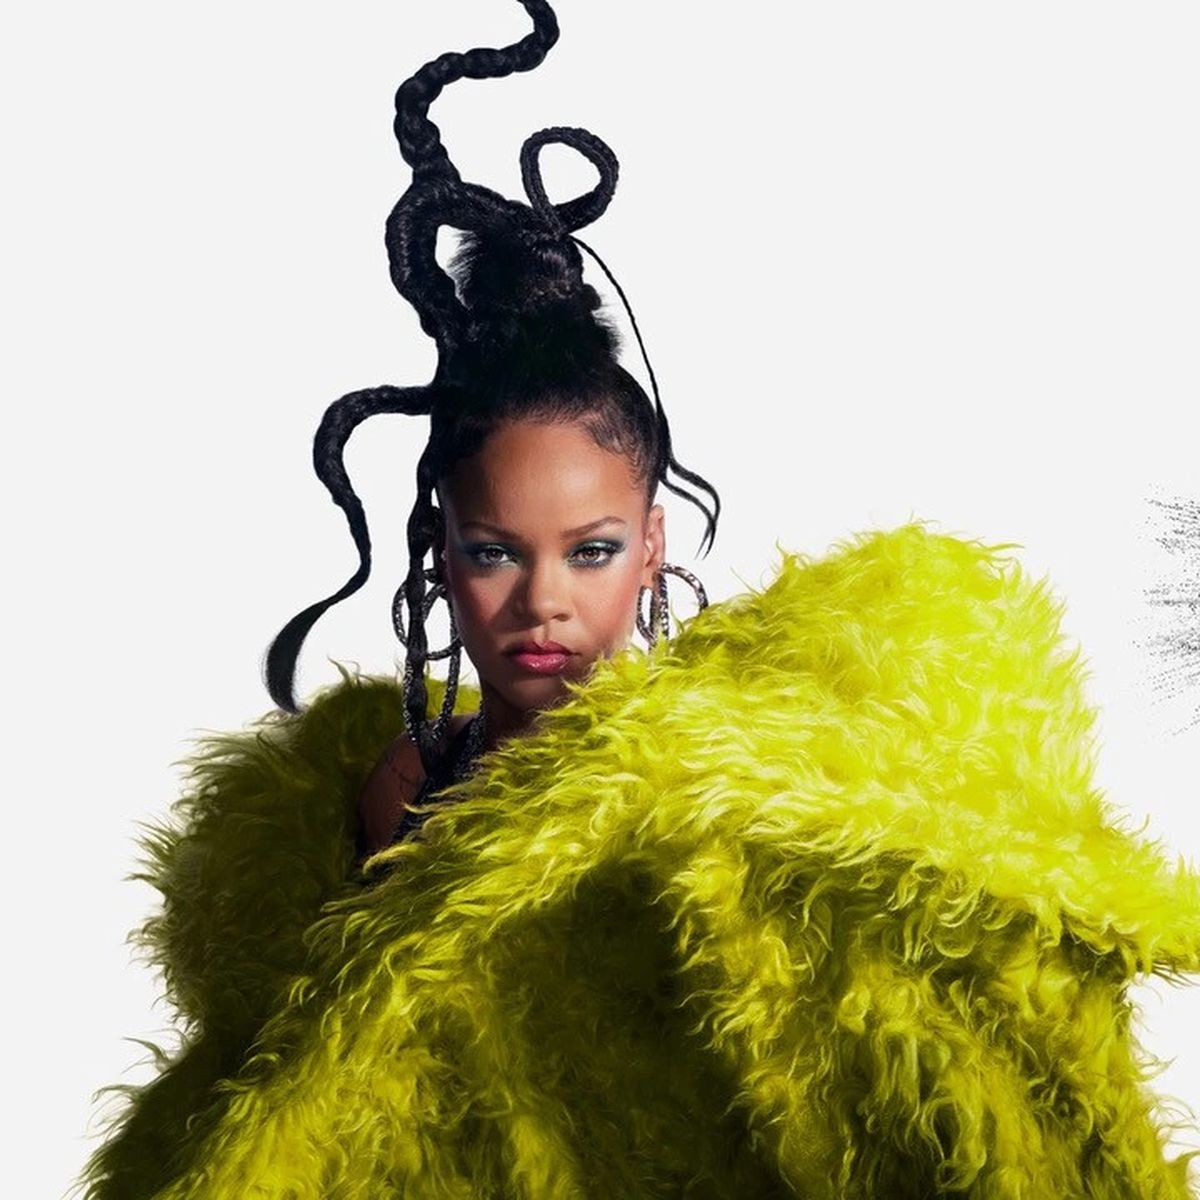 Apple Music Halftime Show: Rihanna Interview, iPhone Wallpaper, and More